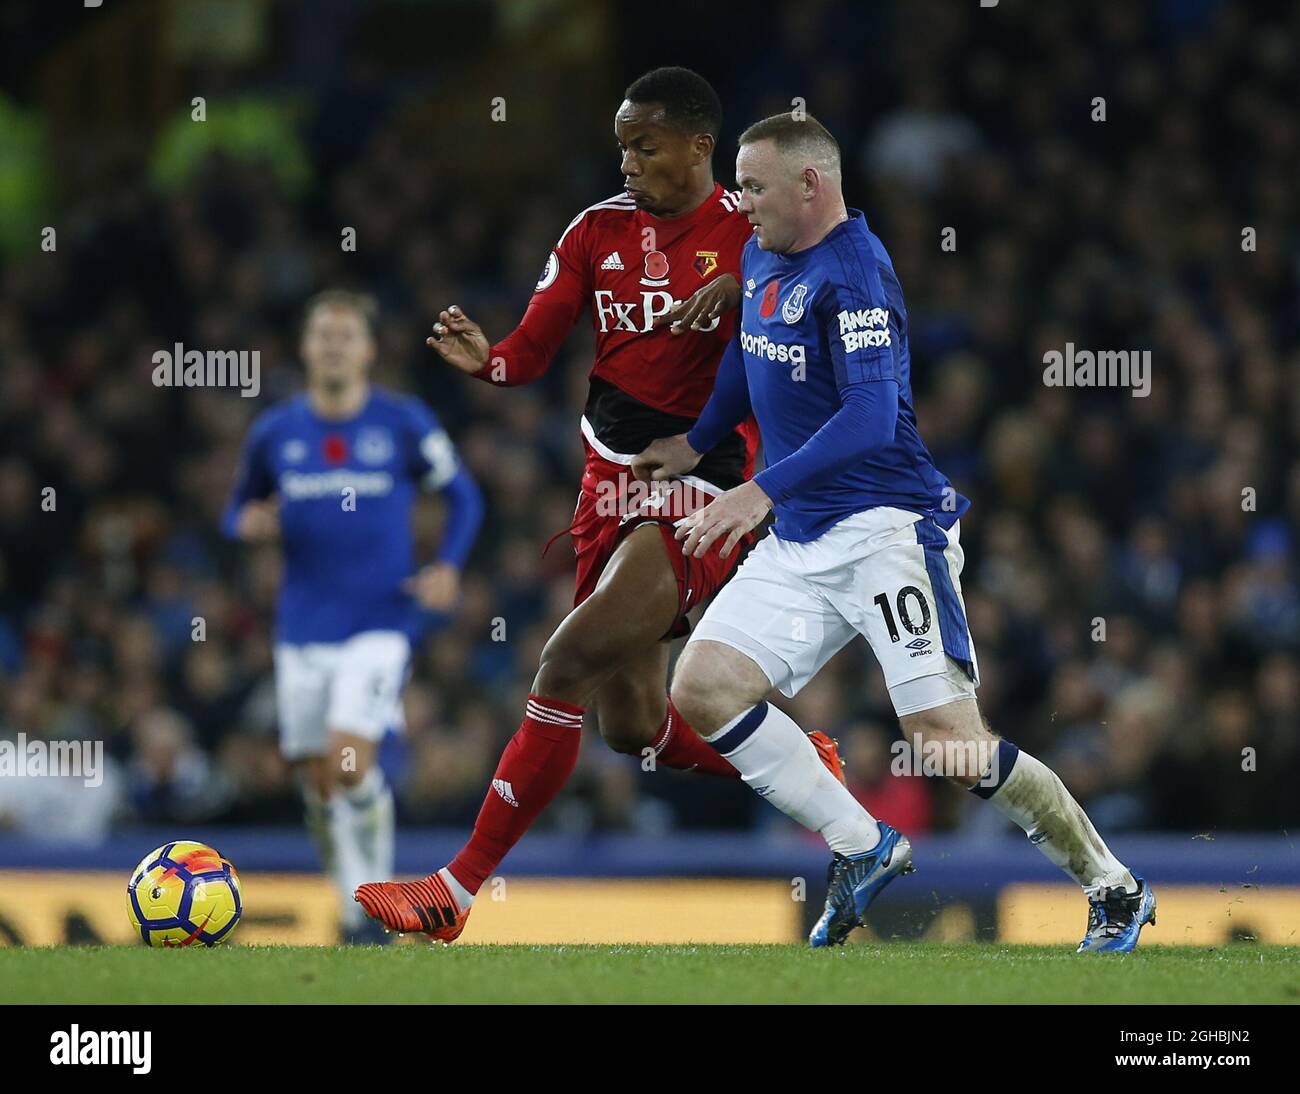 Andre Carrillo of Watford tackled by Wayne Rooney of Everton during the premier league match at Goodison Park  Stadium, Liverpool. Picture date: 5th November 2017. Picture credit should read: Andrew Yates/Sportimage via PA Images Stock Photo